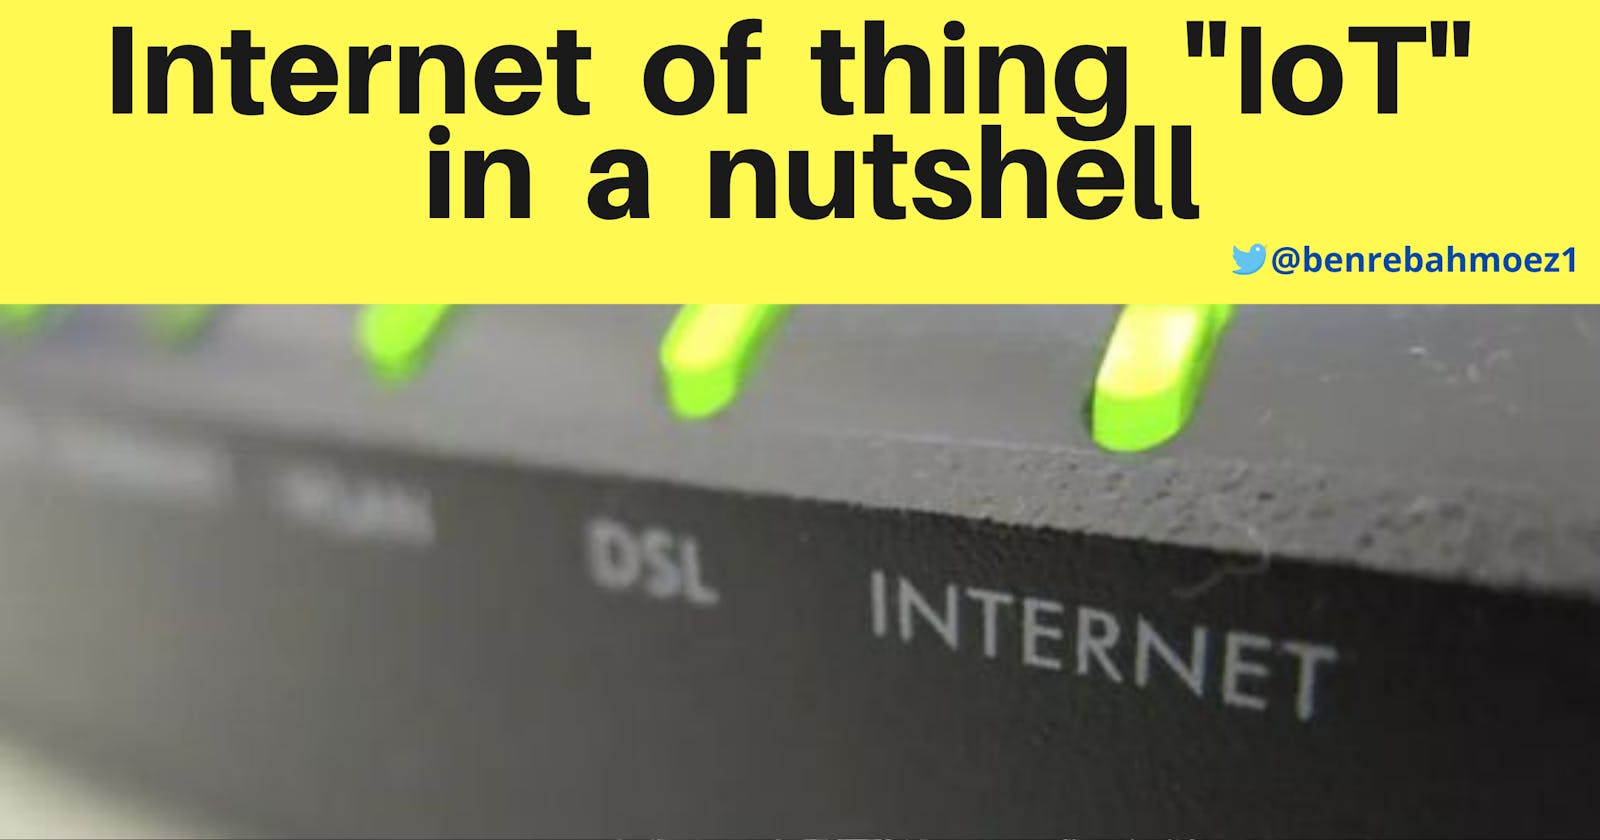 Internet of thing "IoT" in a nutshell